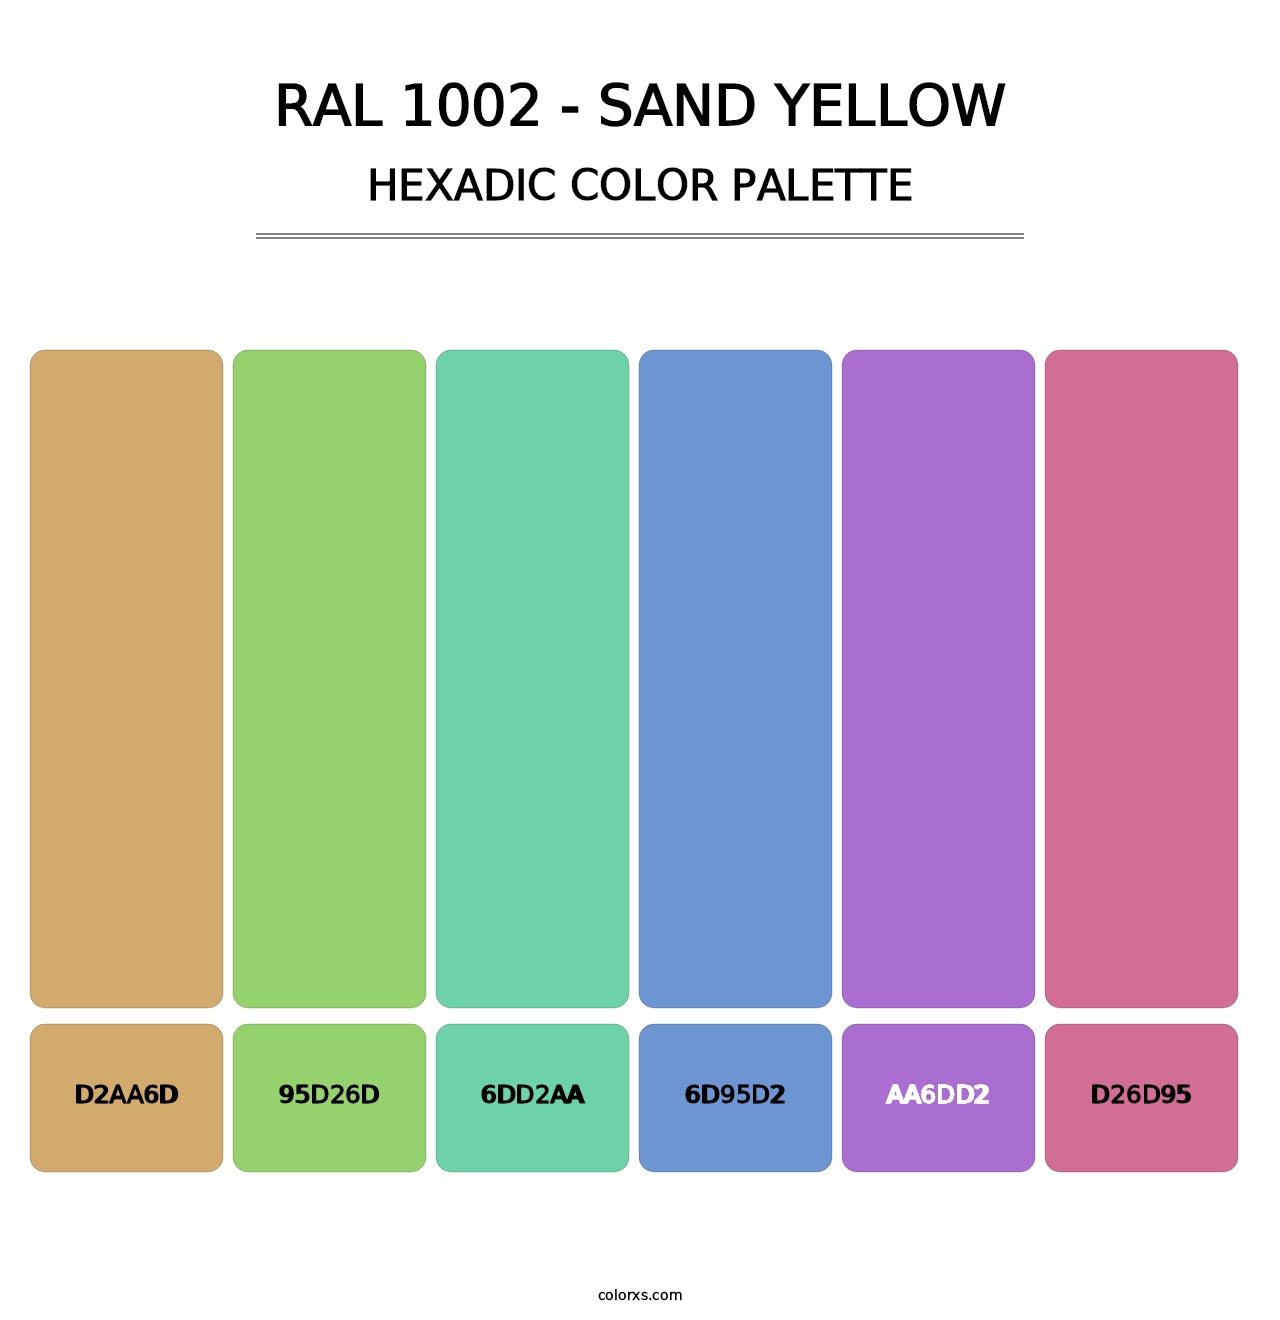 RAL 1002 - Sand Yellow - Hexadic Color Palette